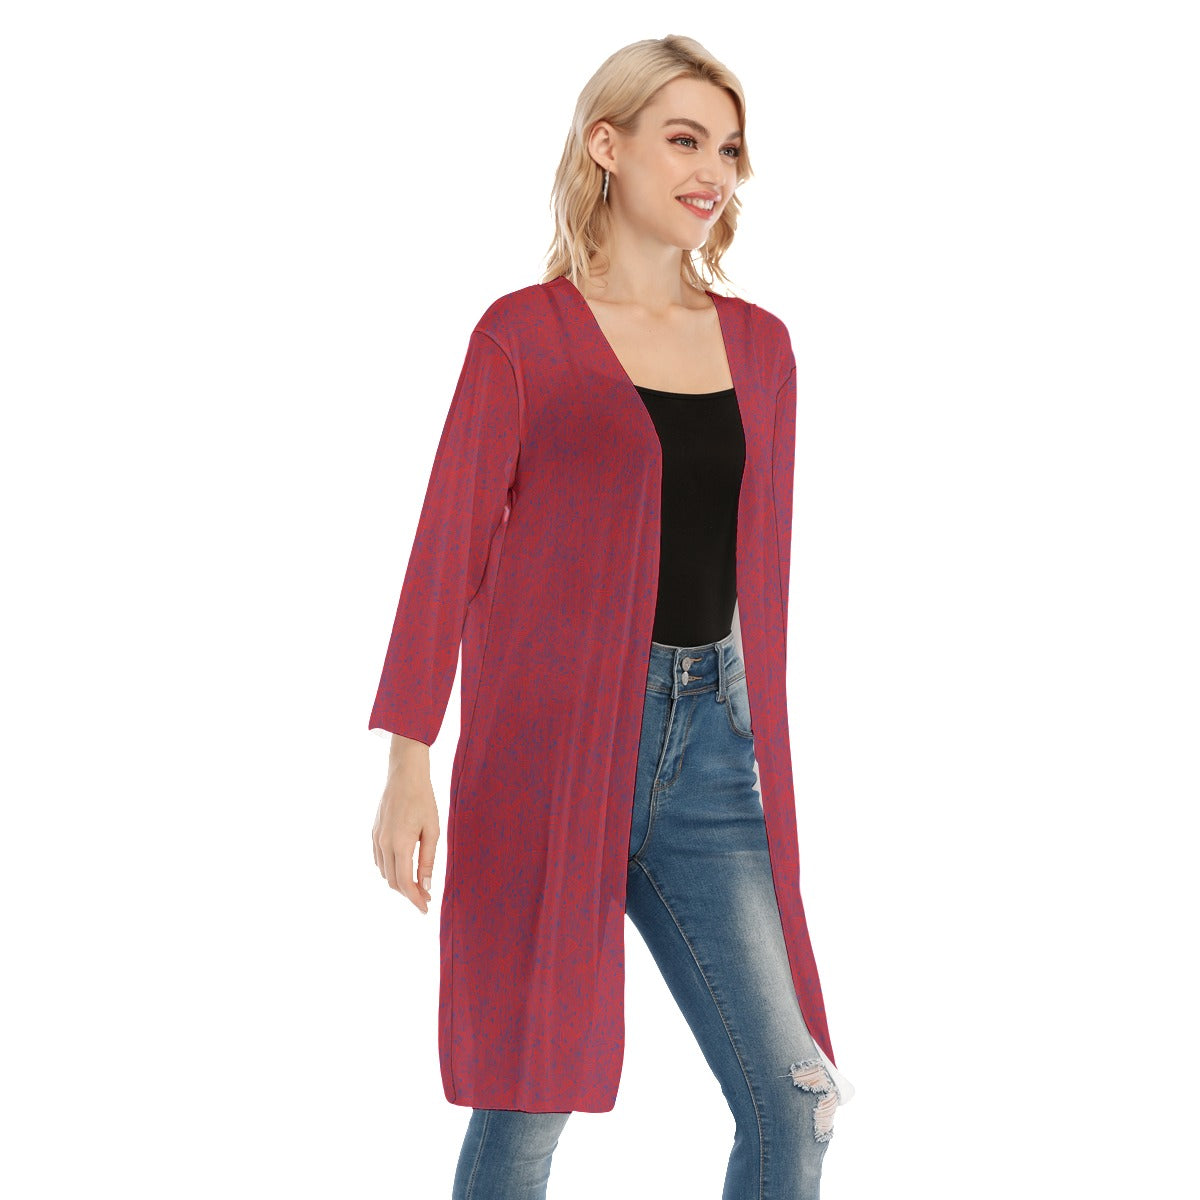 Geometric Red and Blue V-neck Mesh Cardigan. Mesh Tunic. Mesh Kimono. Design hand-painted by the Des